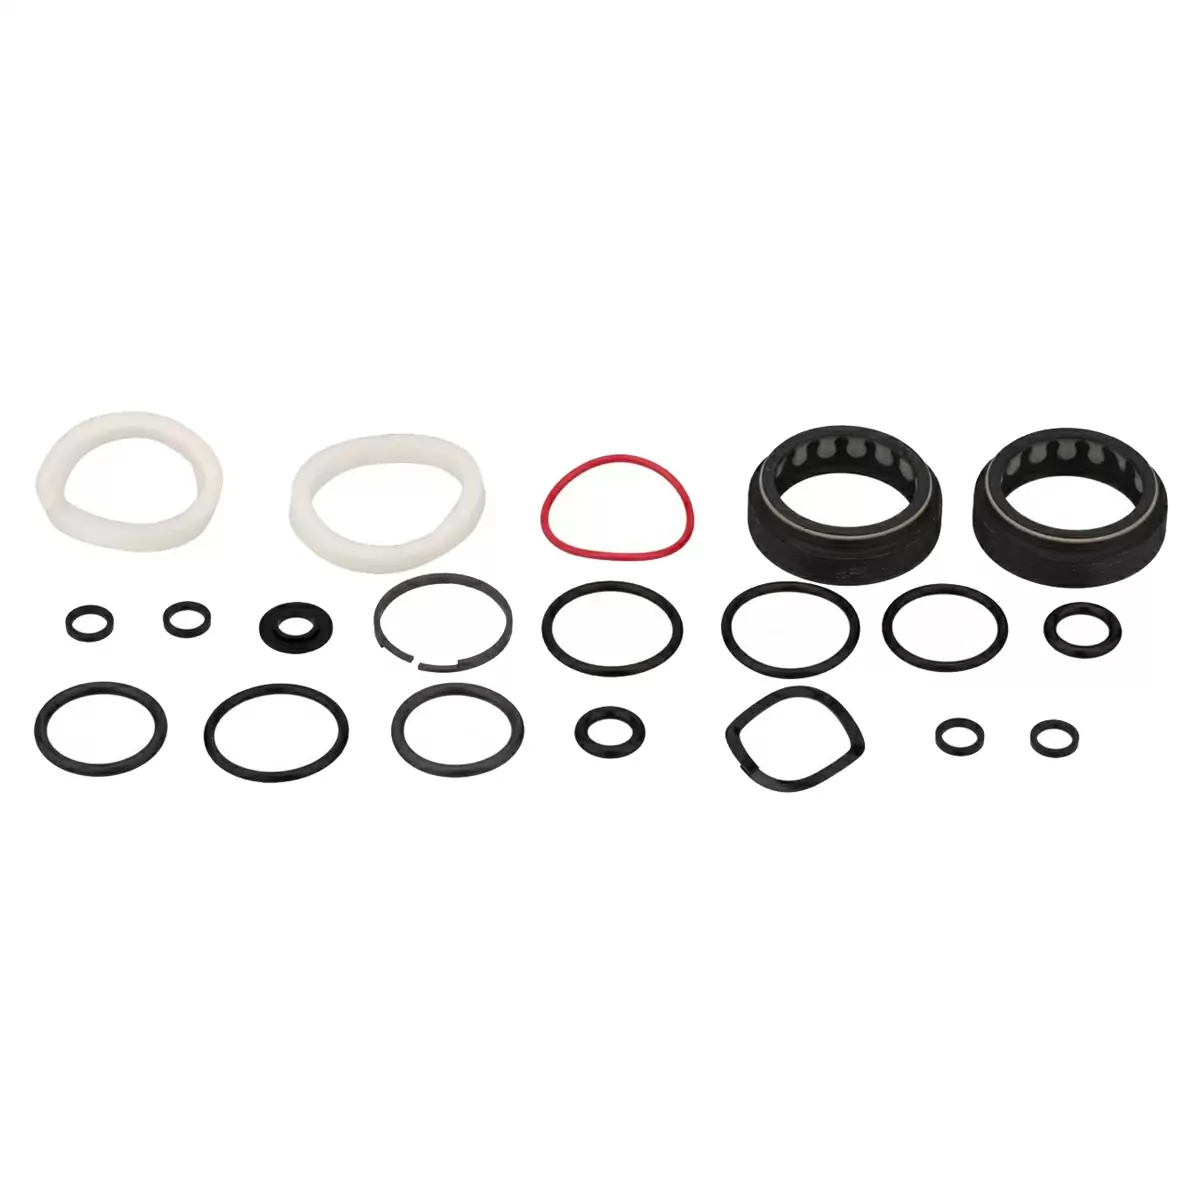 Service kit 200 hours / 1 year fo 35 Gold RL A1 from 2020 model - image